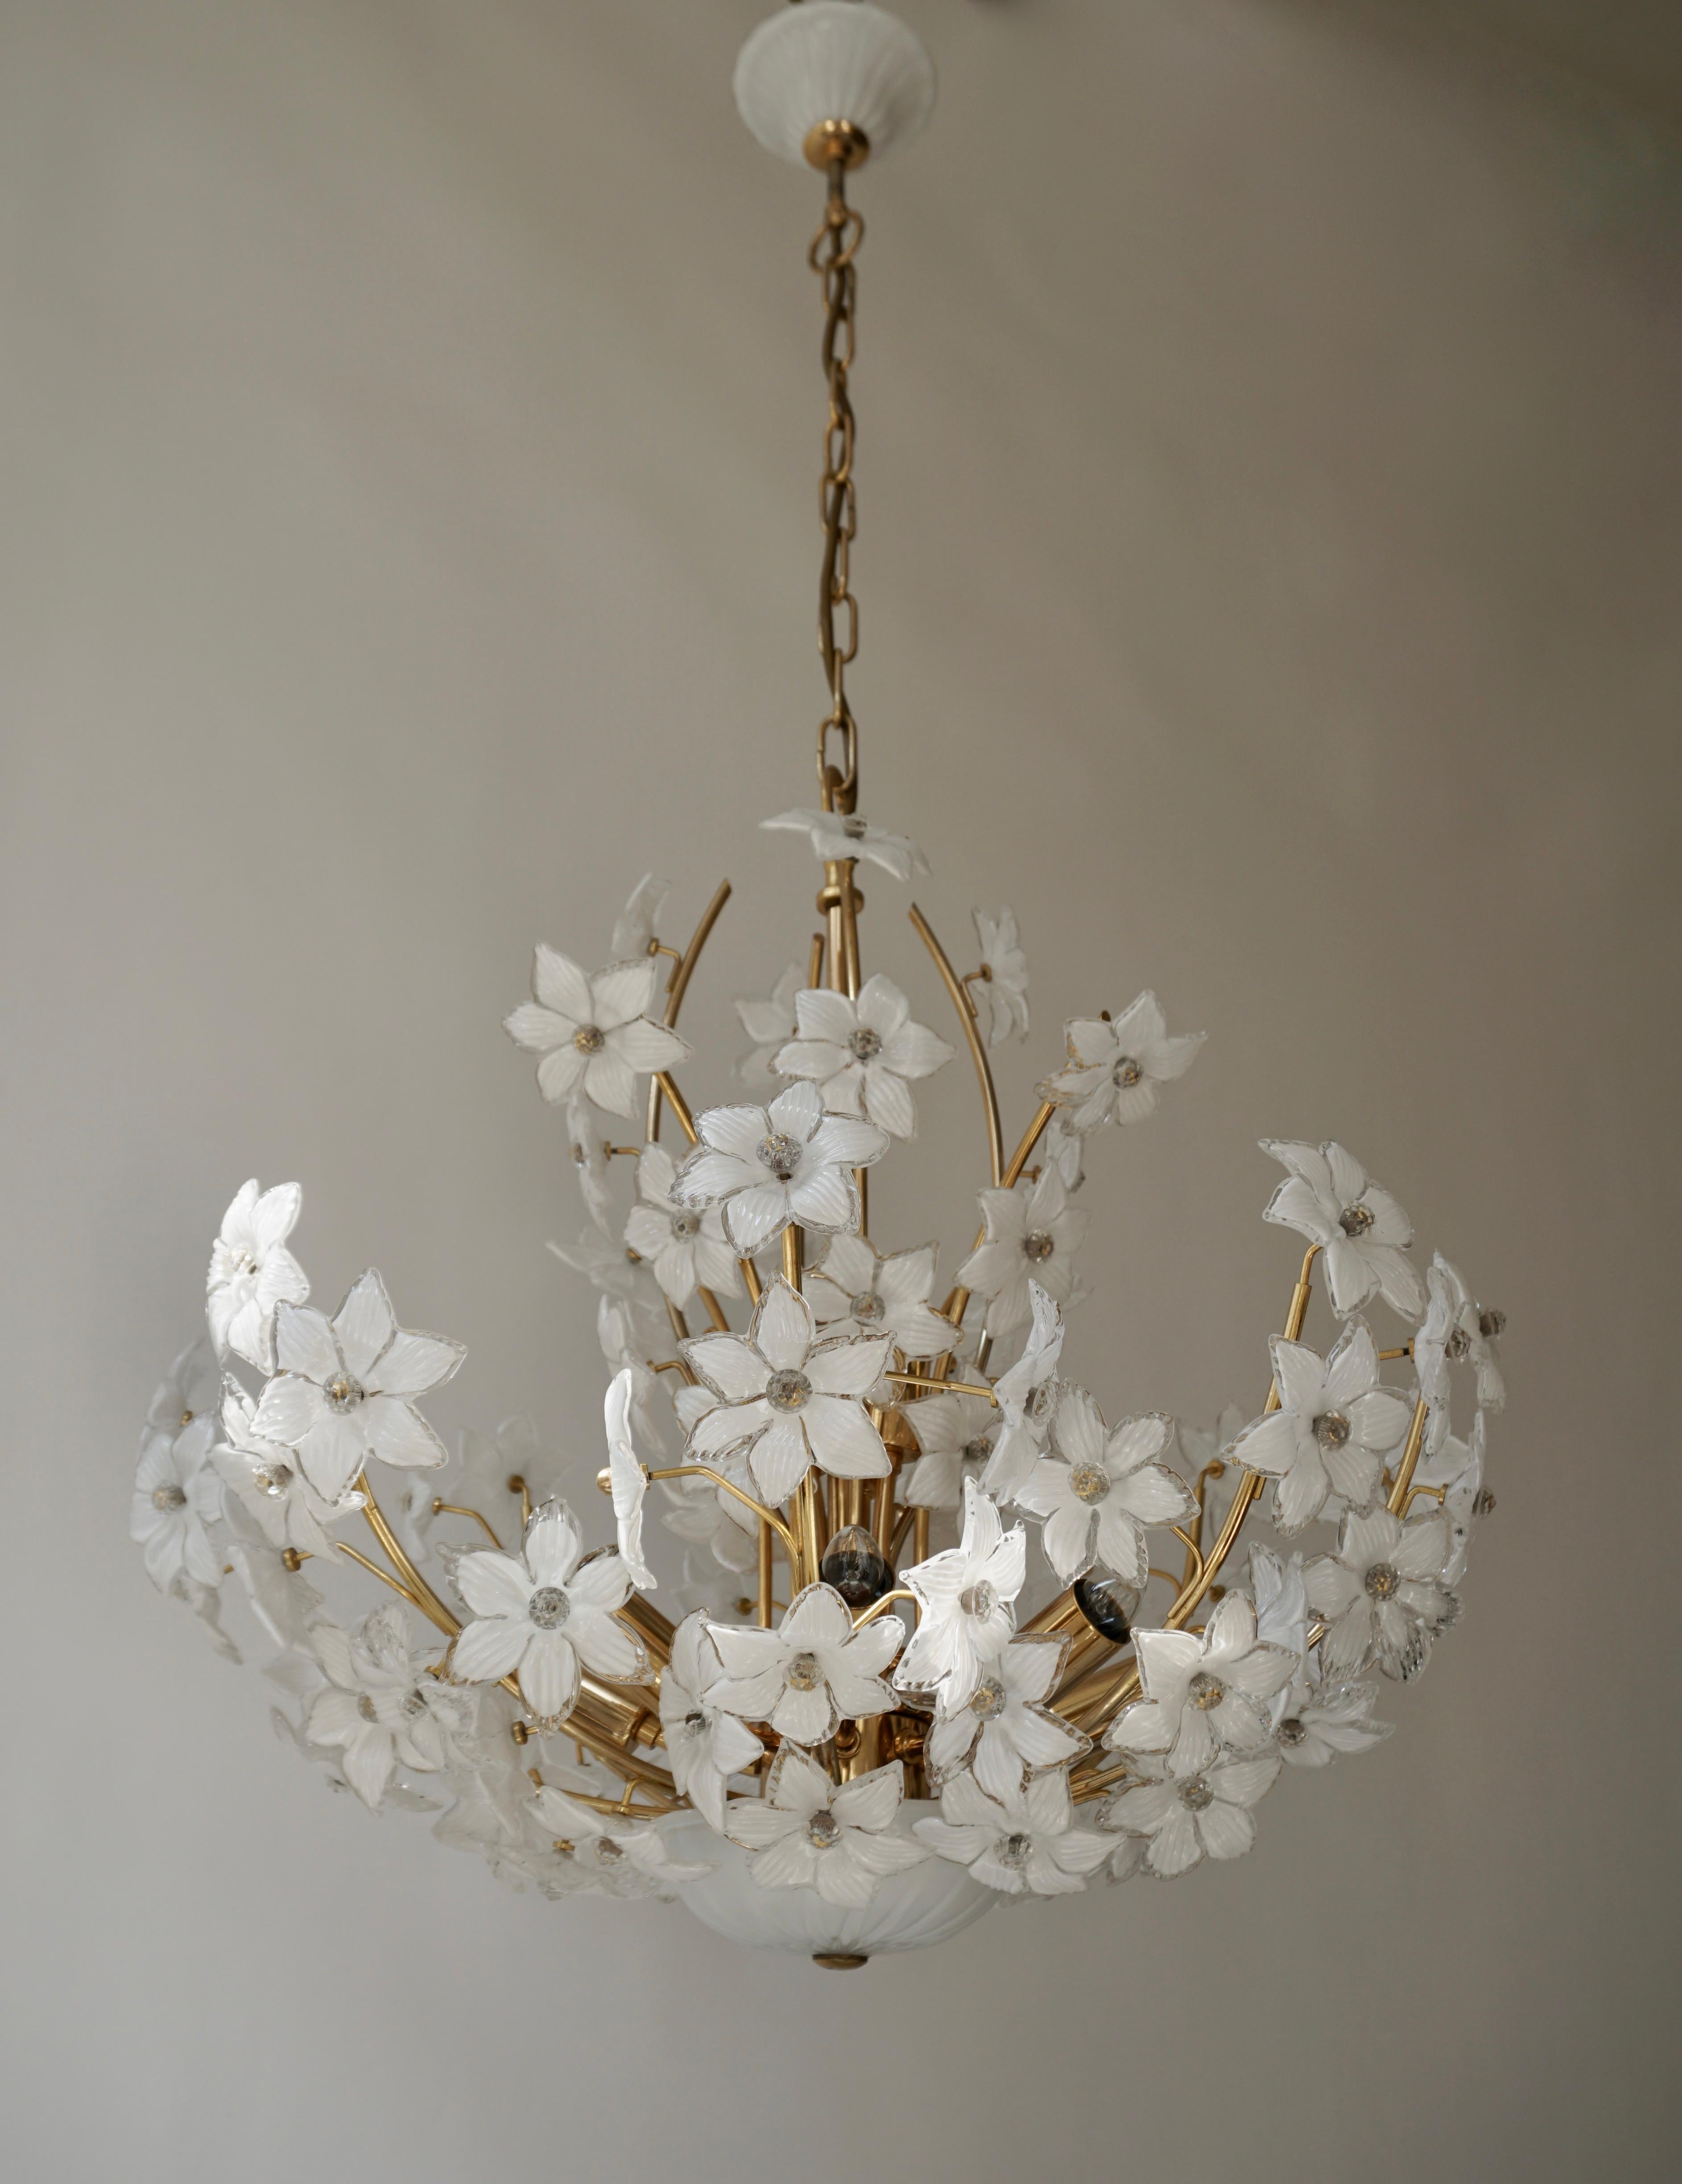 Large 1970s vintage midcentury Italian Murano flower bouquet Chandelier attributed to Venini. Art glass with 88 hand blown white and clear glass flowers and gold-plated brass. 
The glass flowers are attached with glass screws and the ceiling plate